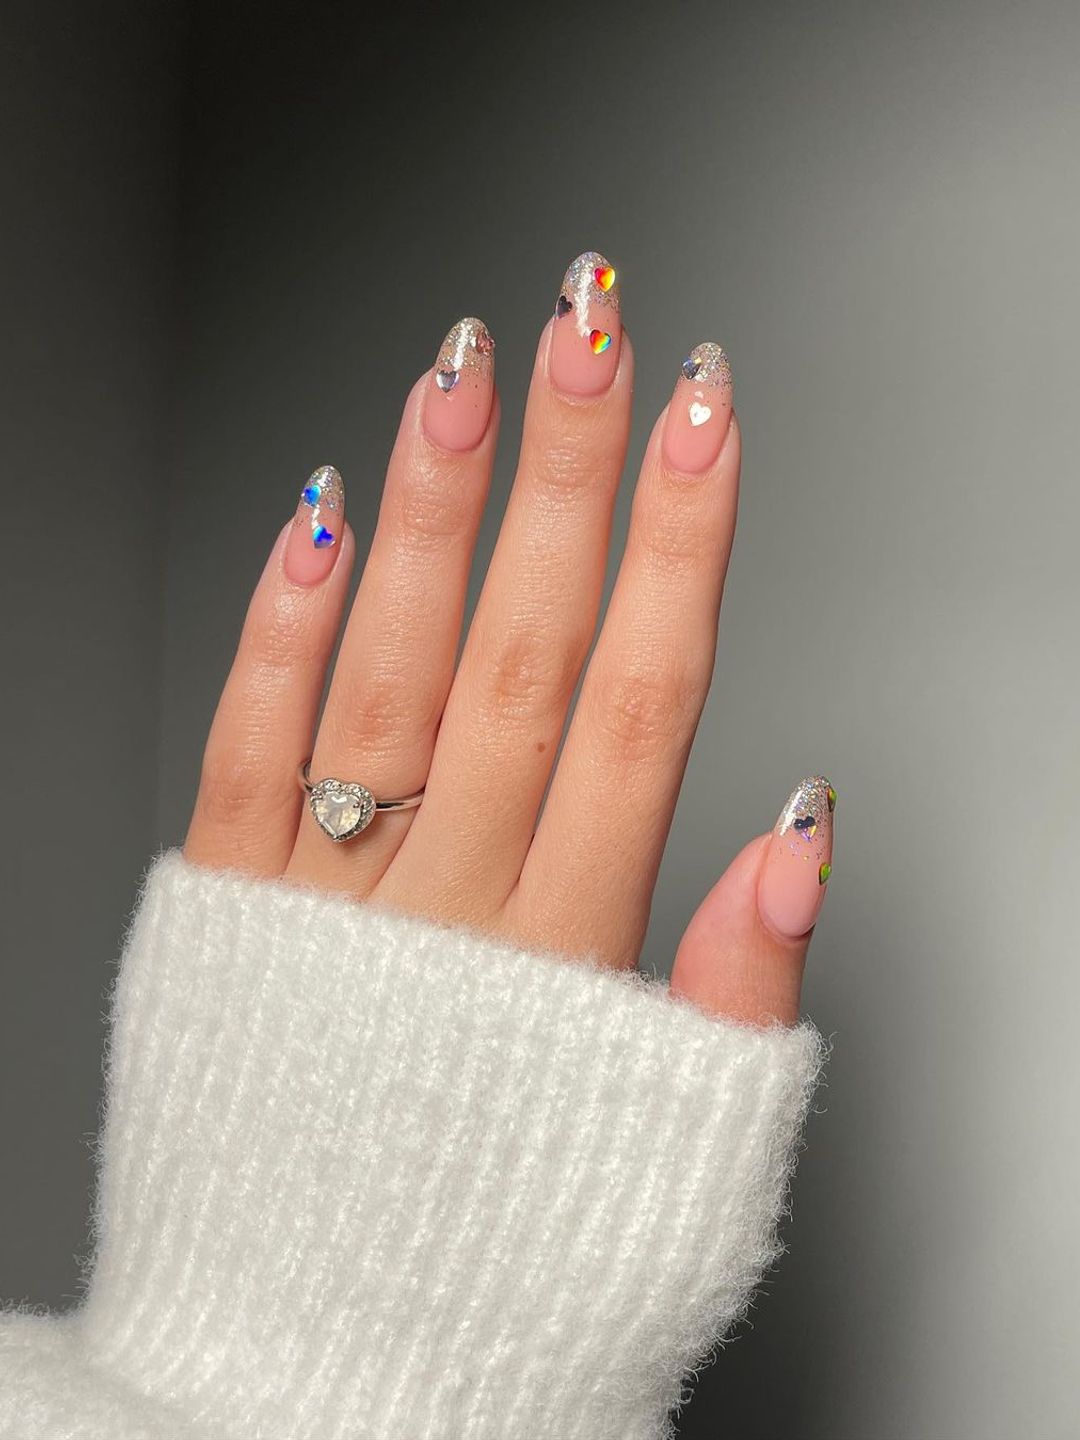 Nails with silver glitter and heart gems 